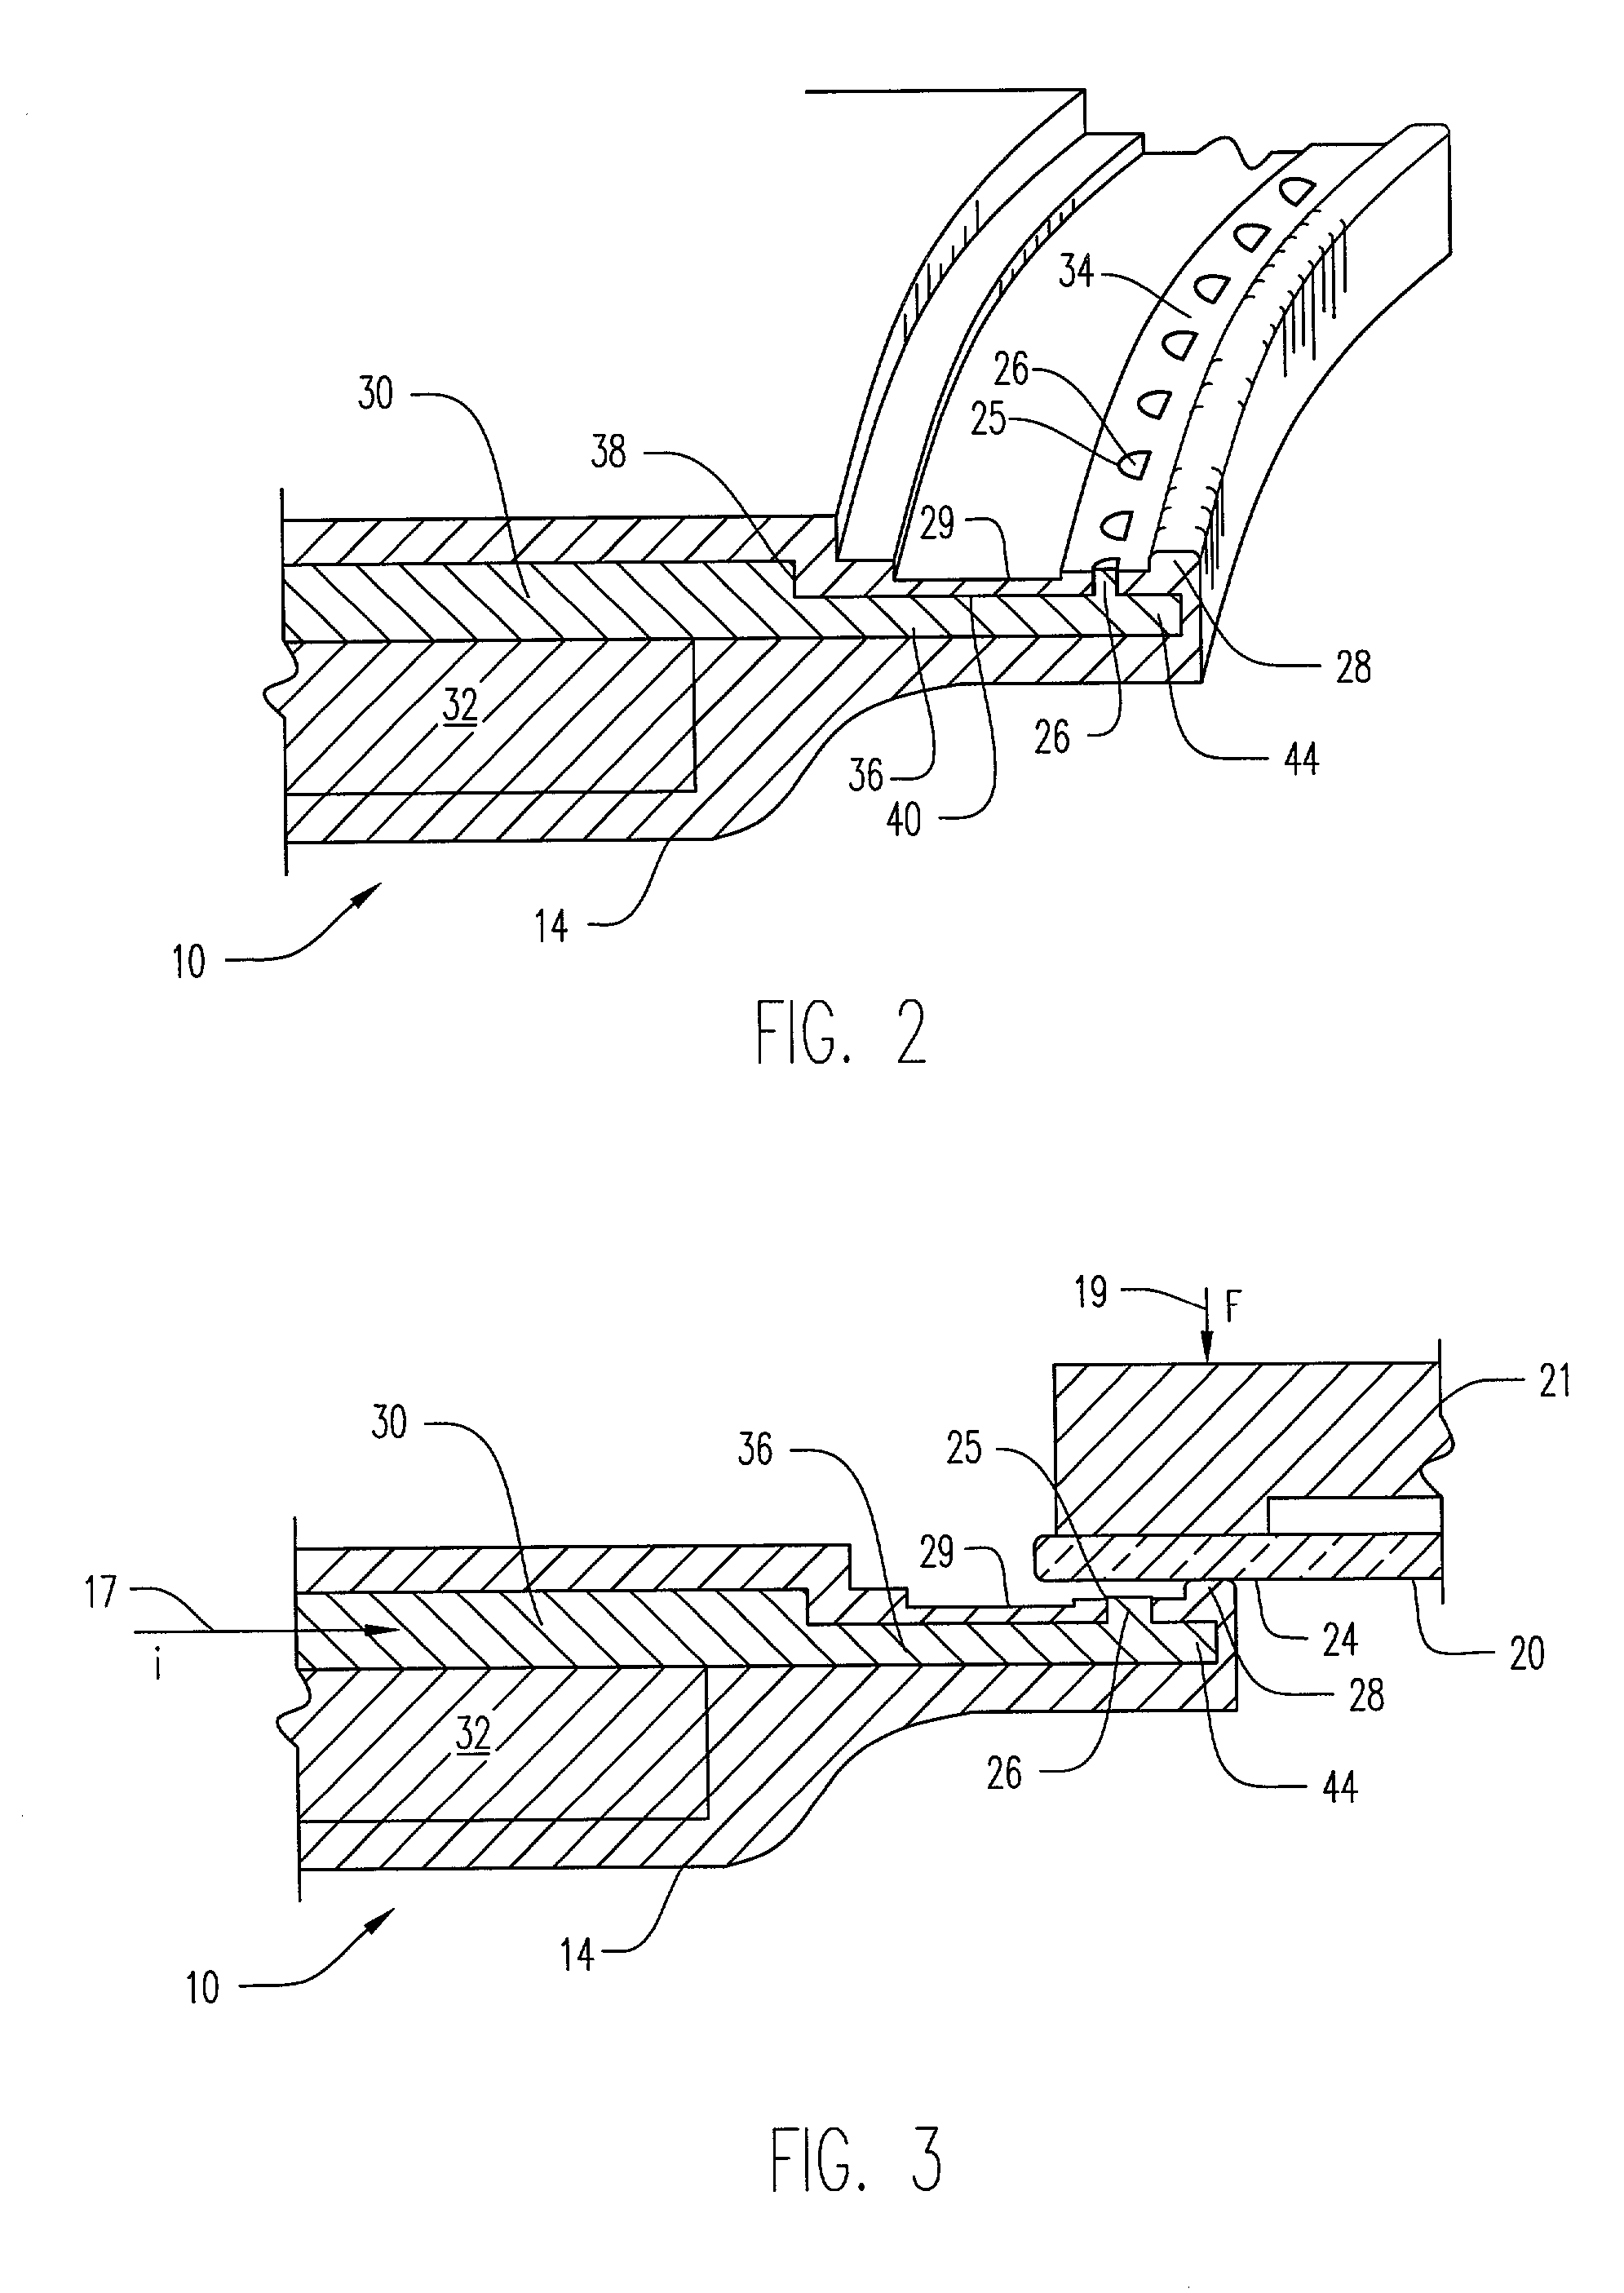 Method of and apparatus for fluid sealing, while electrically contacting, wet-processed workpieces, as in the electrodeposition of semi-conductor wafers and the like and for other wet processing techniques and workpieces